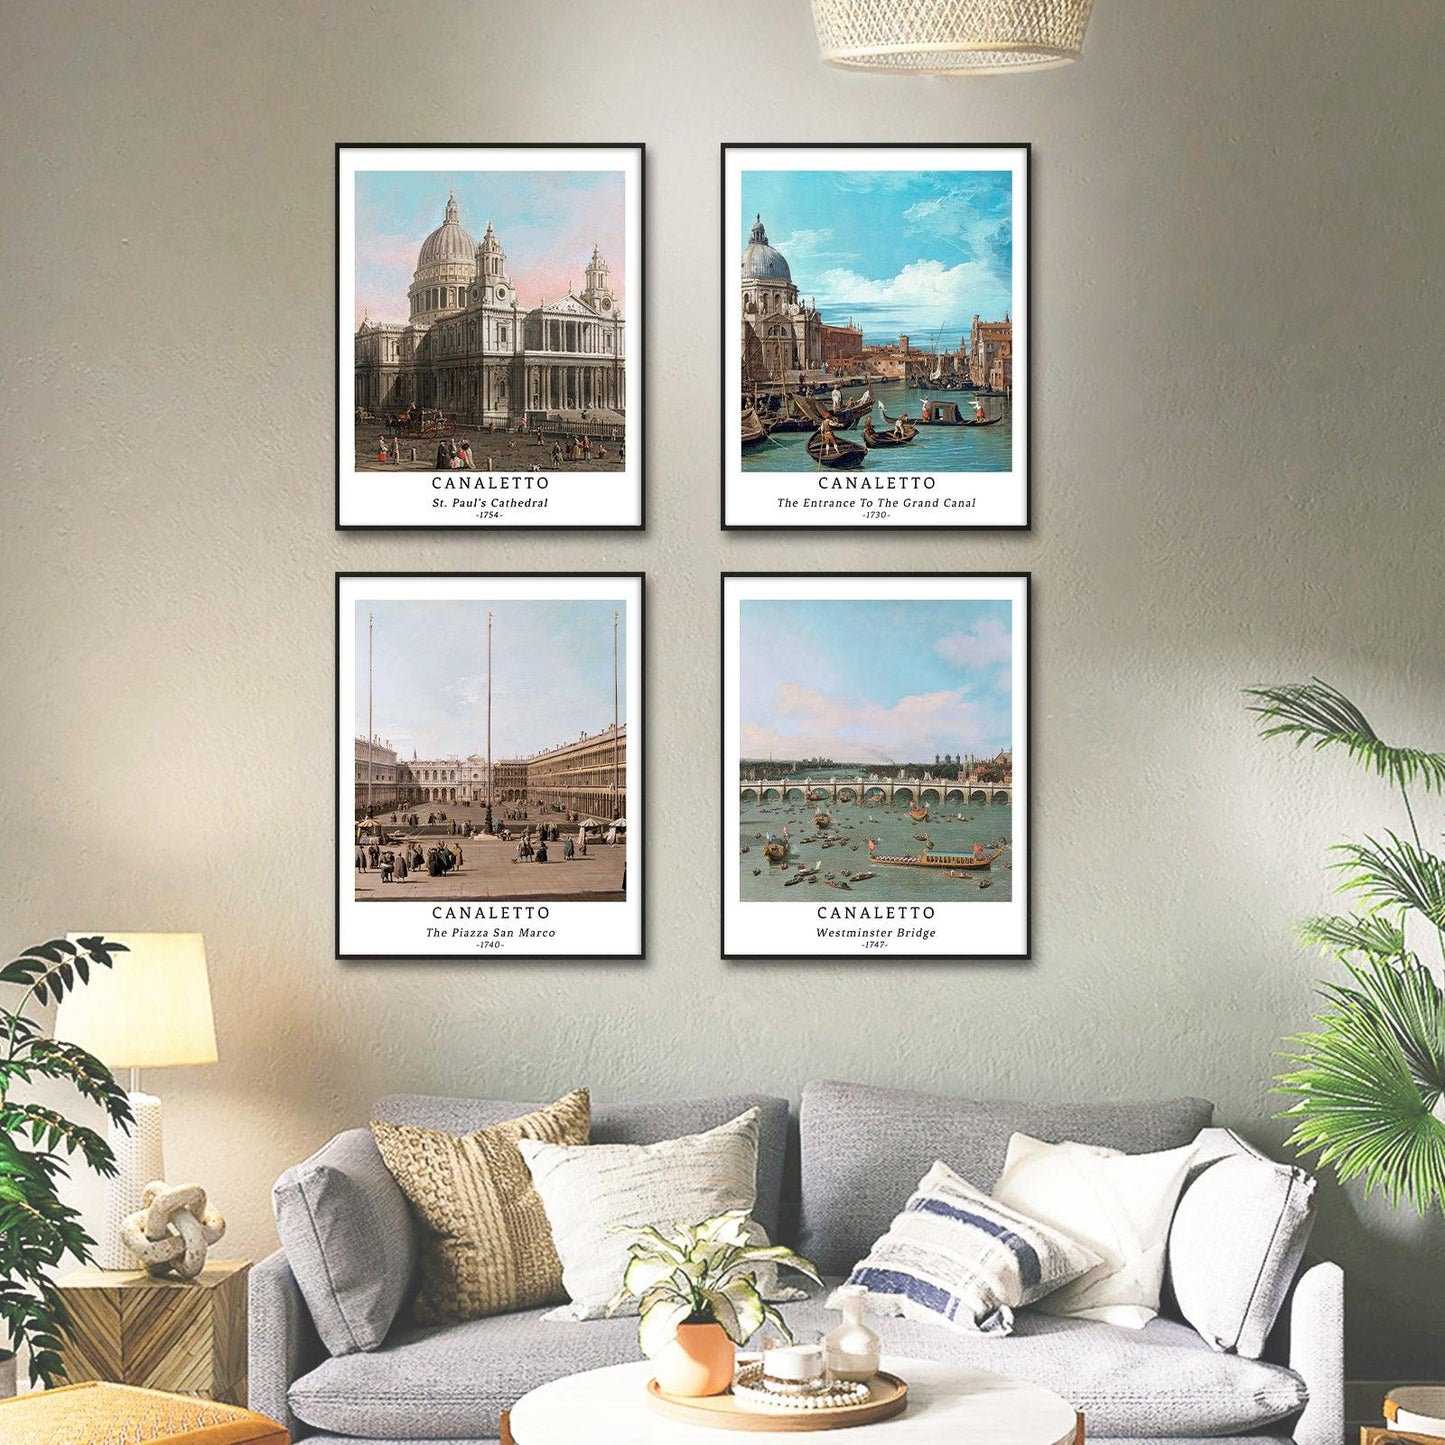 Classical Landscape Art Paper Giclee Prints Set of 4 (Canaletto Series) - Berkin Arts